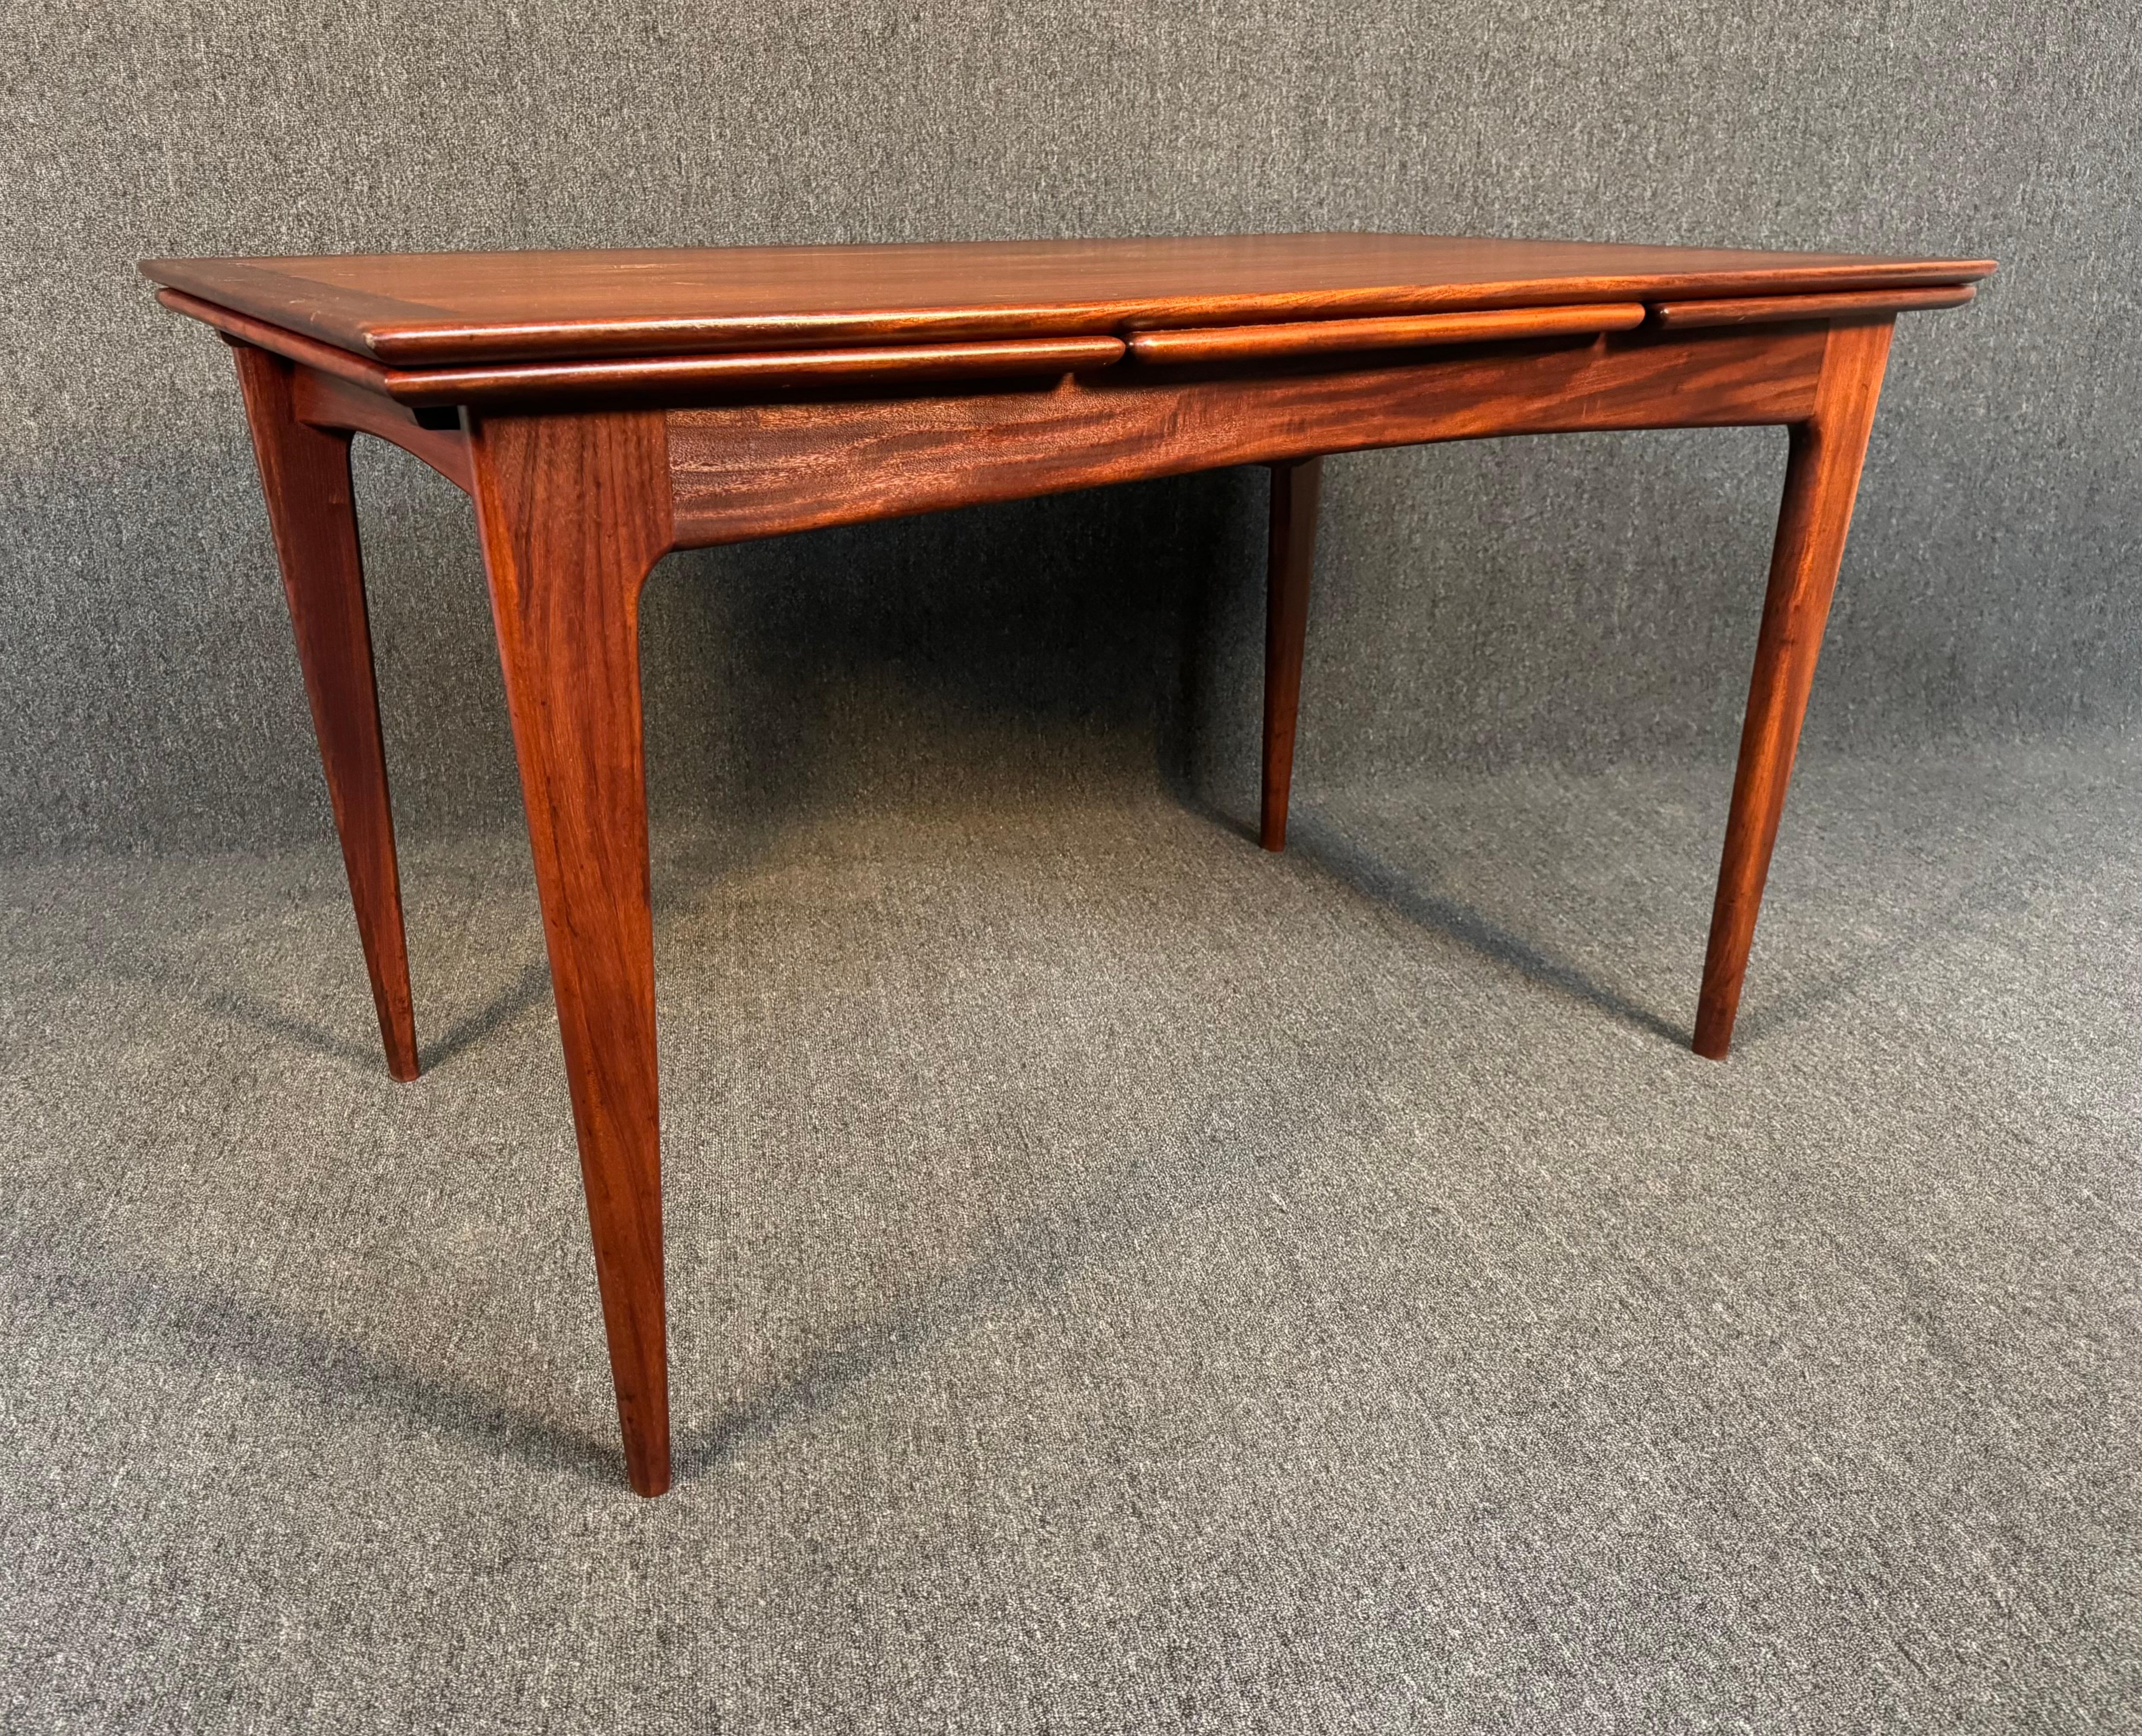 Vintage British Mid Century Modern Afromasia Teak Dining Table by A. Younger Ltd In Good Condition For Sale In San Marcos, CA